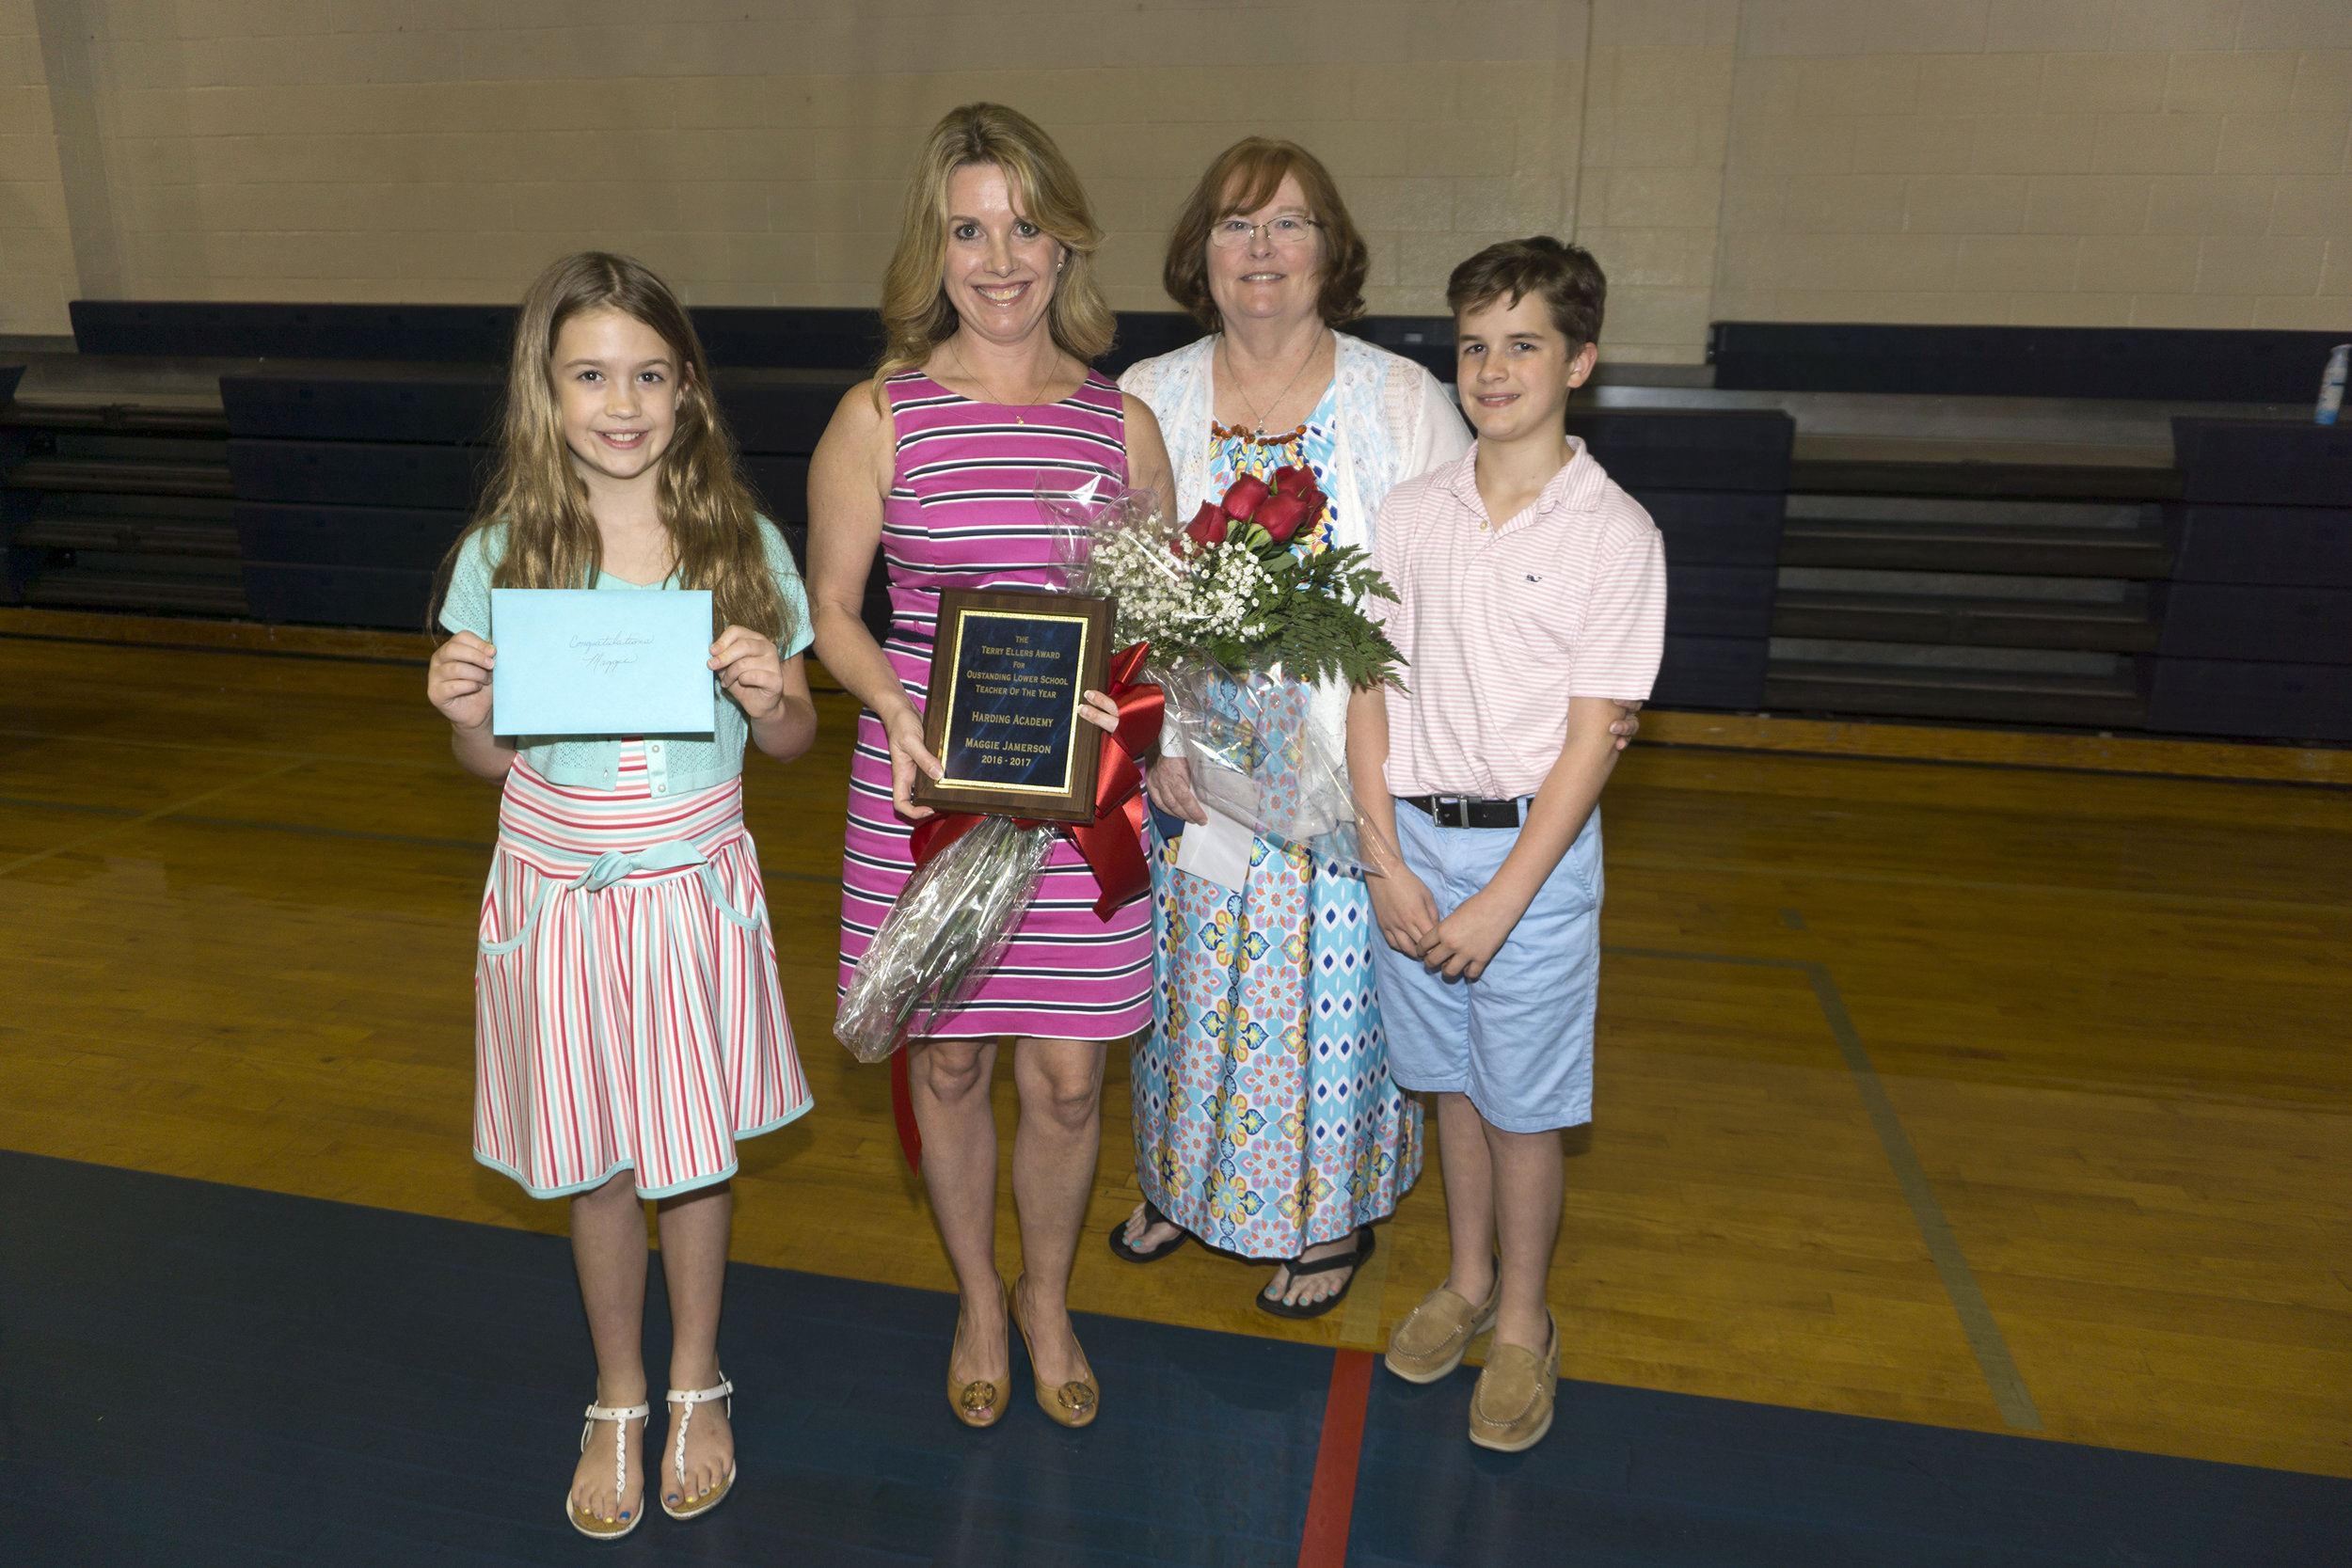 Maggie Jamerson—The Terry Ellers Award for Outstanding Lower School Teacher of the Year